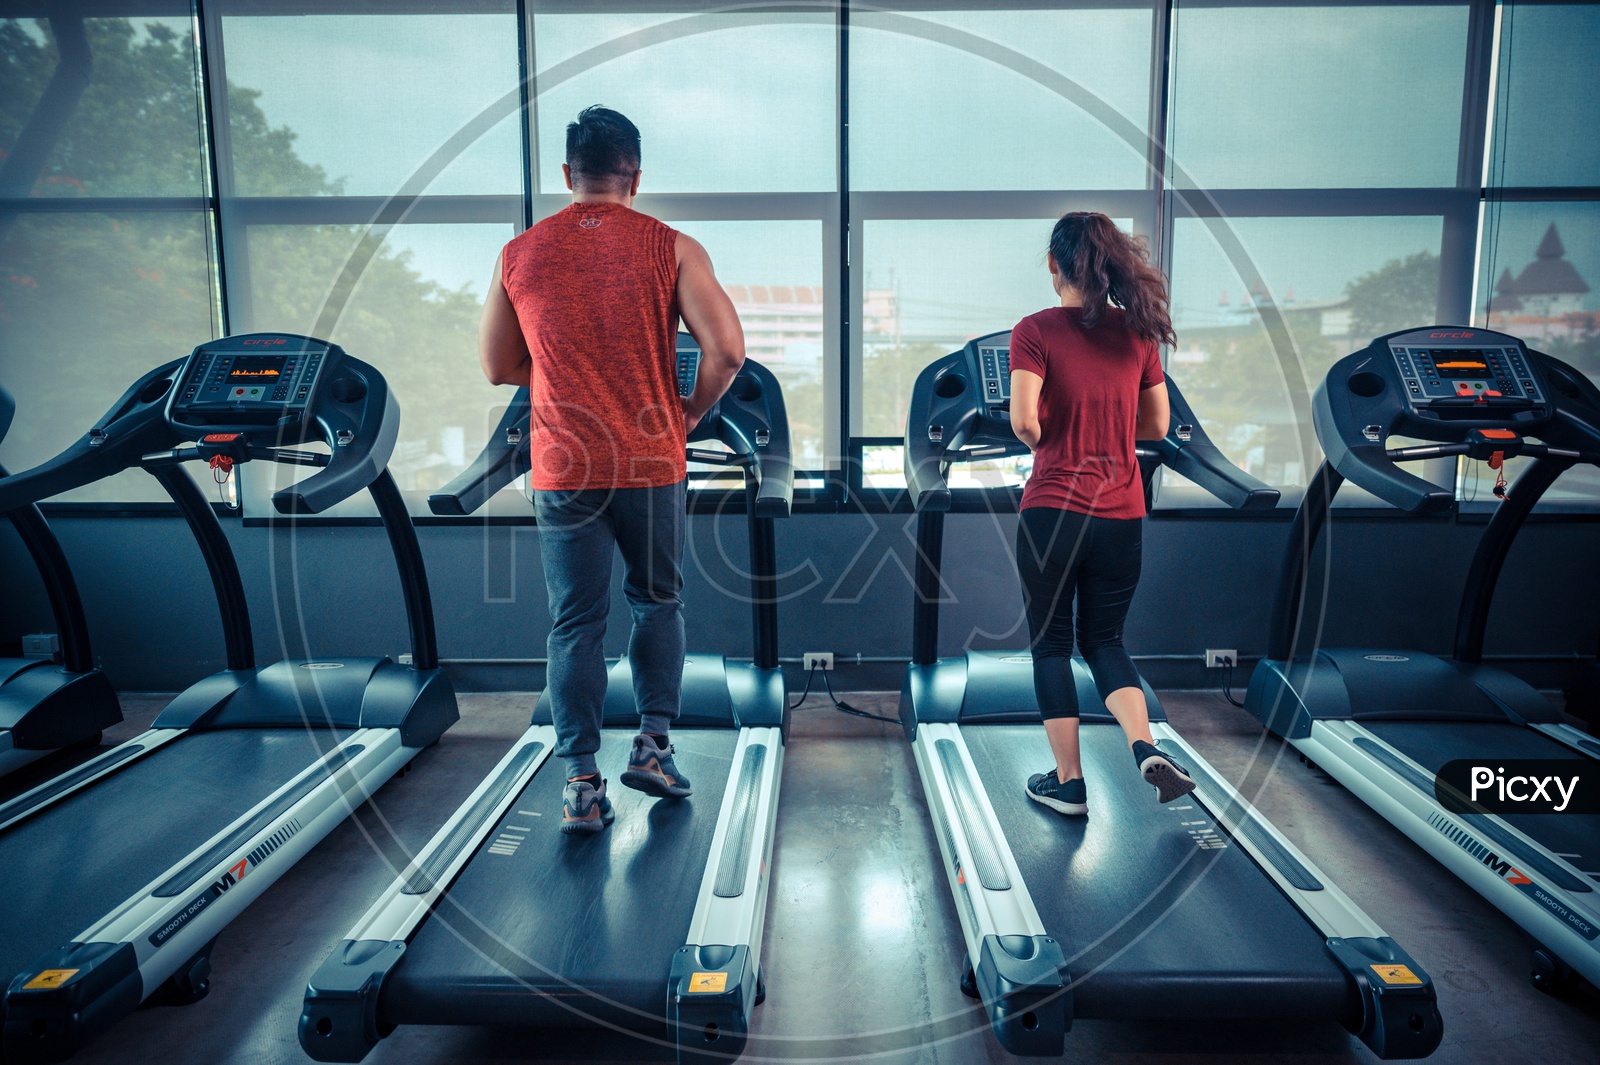 Couple on treadmill exercising in the gym